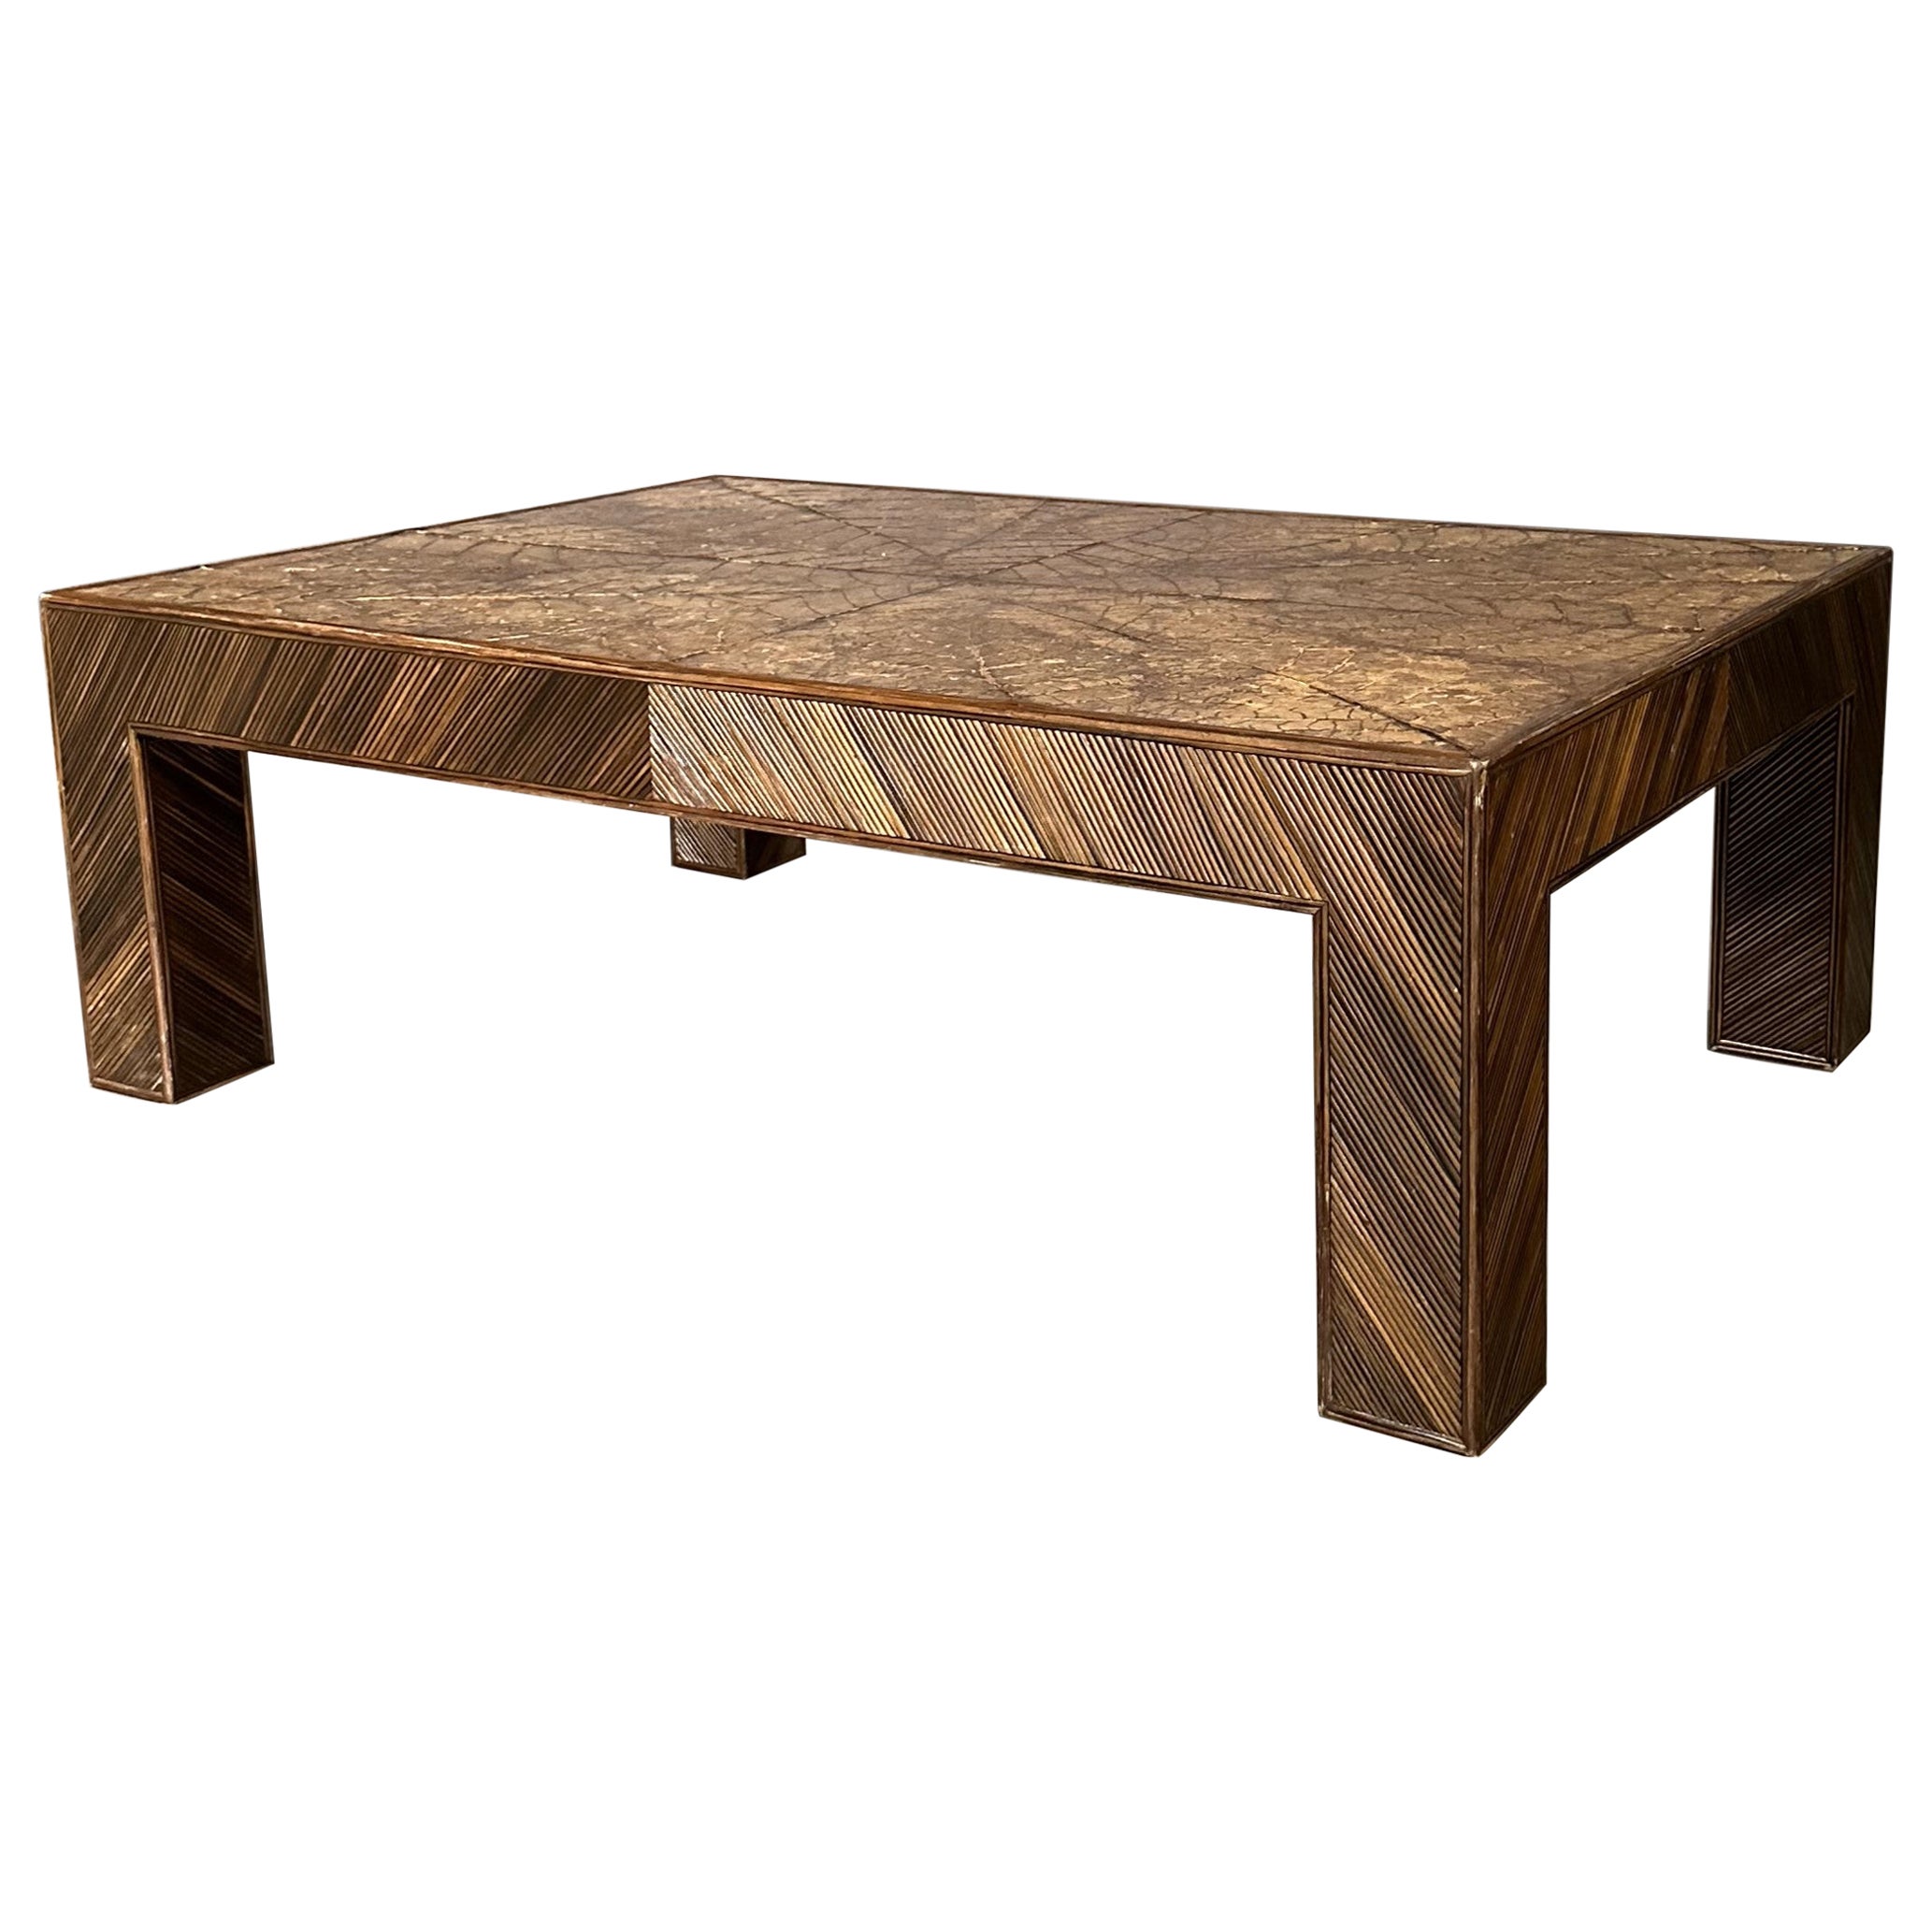 70s coffee table, in bamboo with tobacco leaf top by Arpex International For Sale